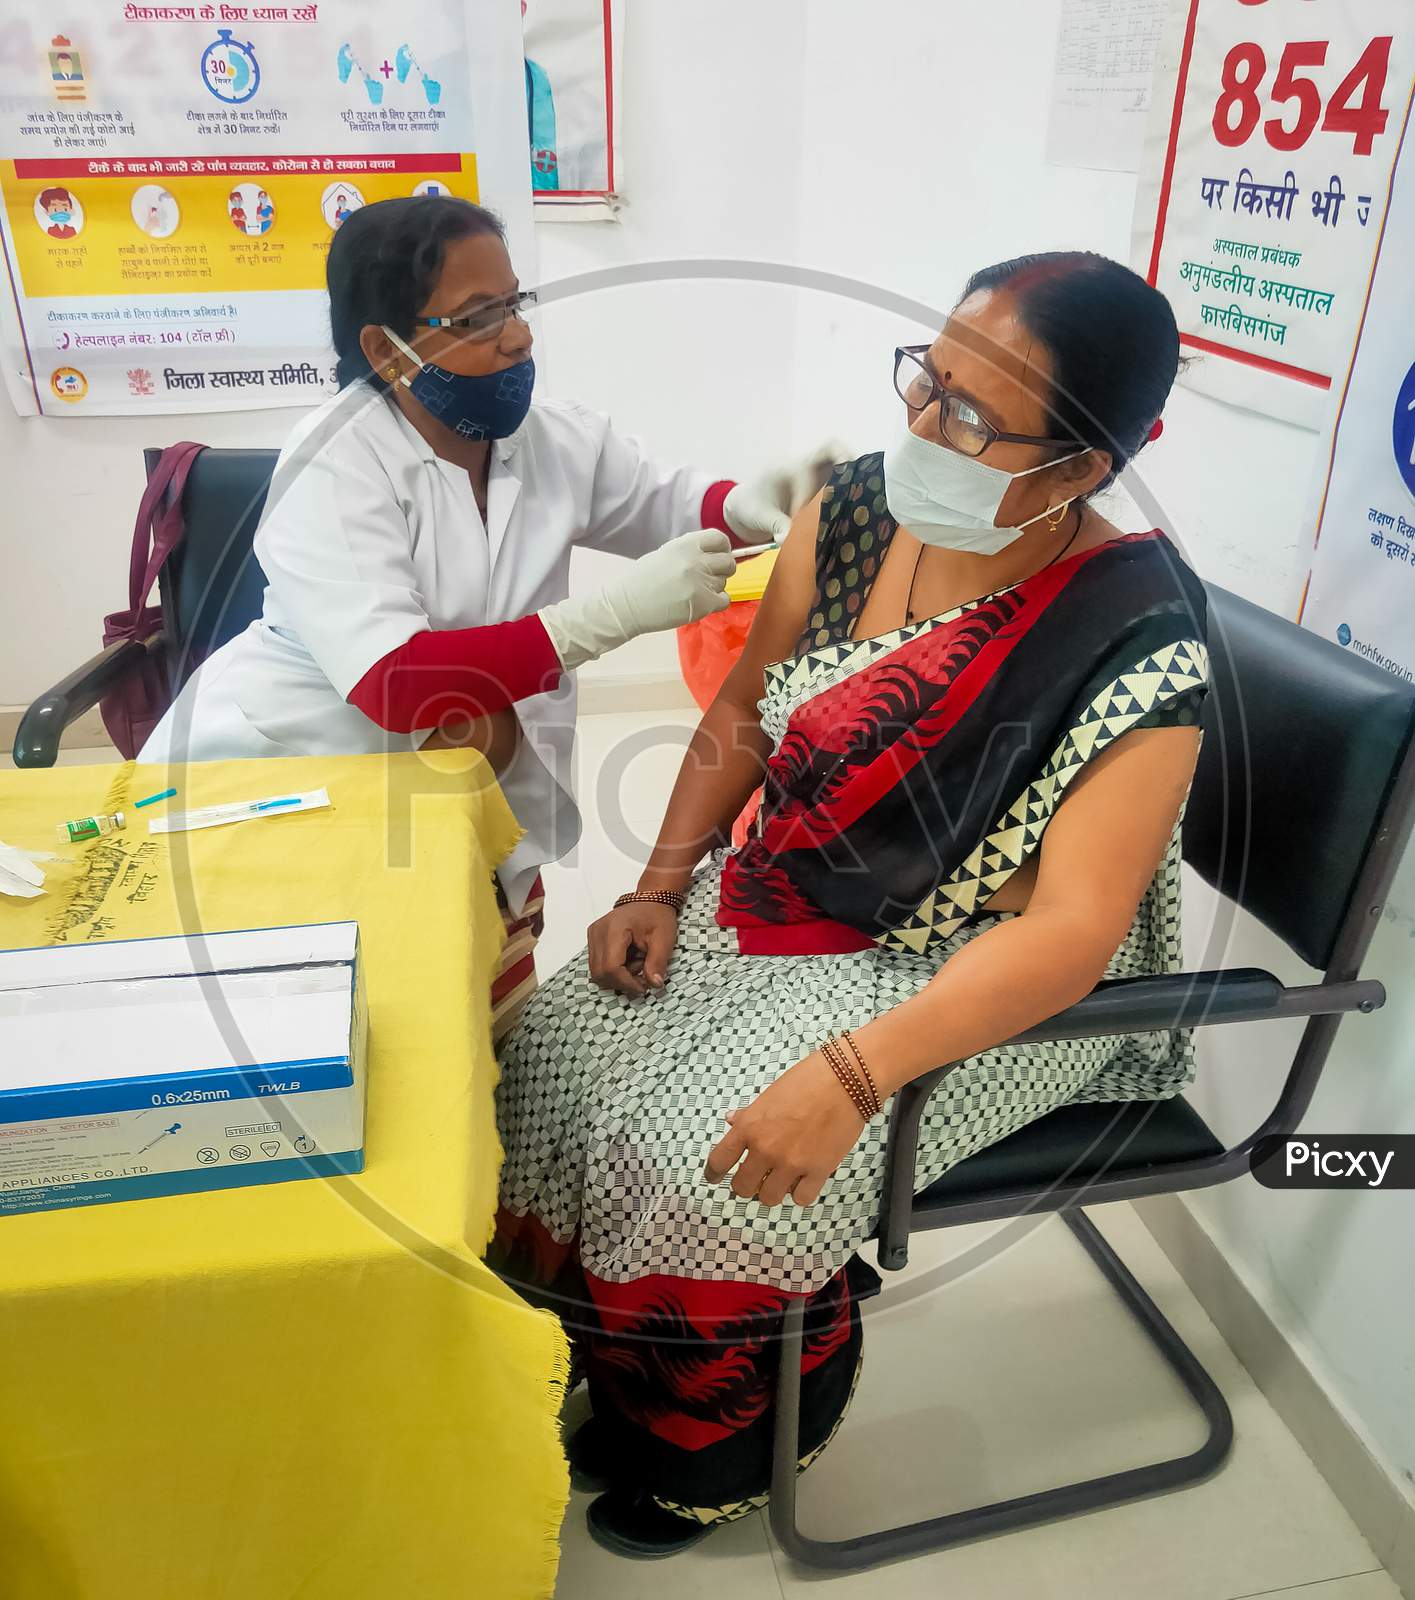 Araria-Bihar-India-03-30-2021- Woman Doctor Or Nurse Giving Syringe Vaccine, Inject Shot To Arm Female Patient. Vaccination, Immunization Or Disease Prevention Against Flu Or Virus Pandemic Concept.